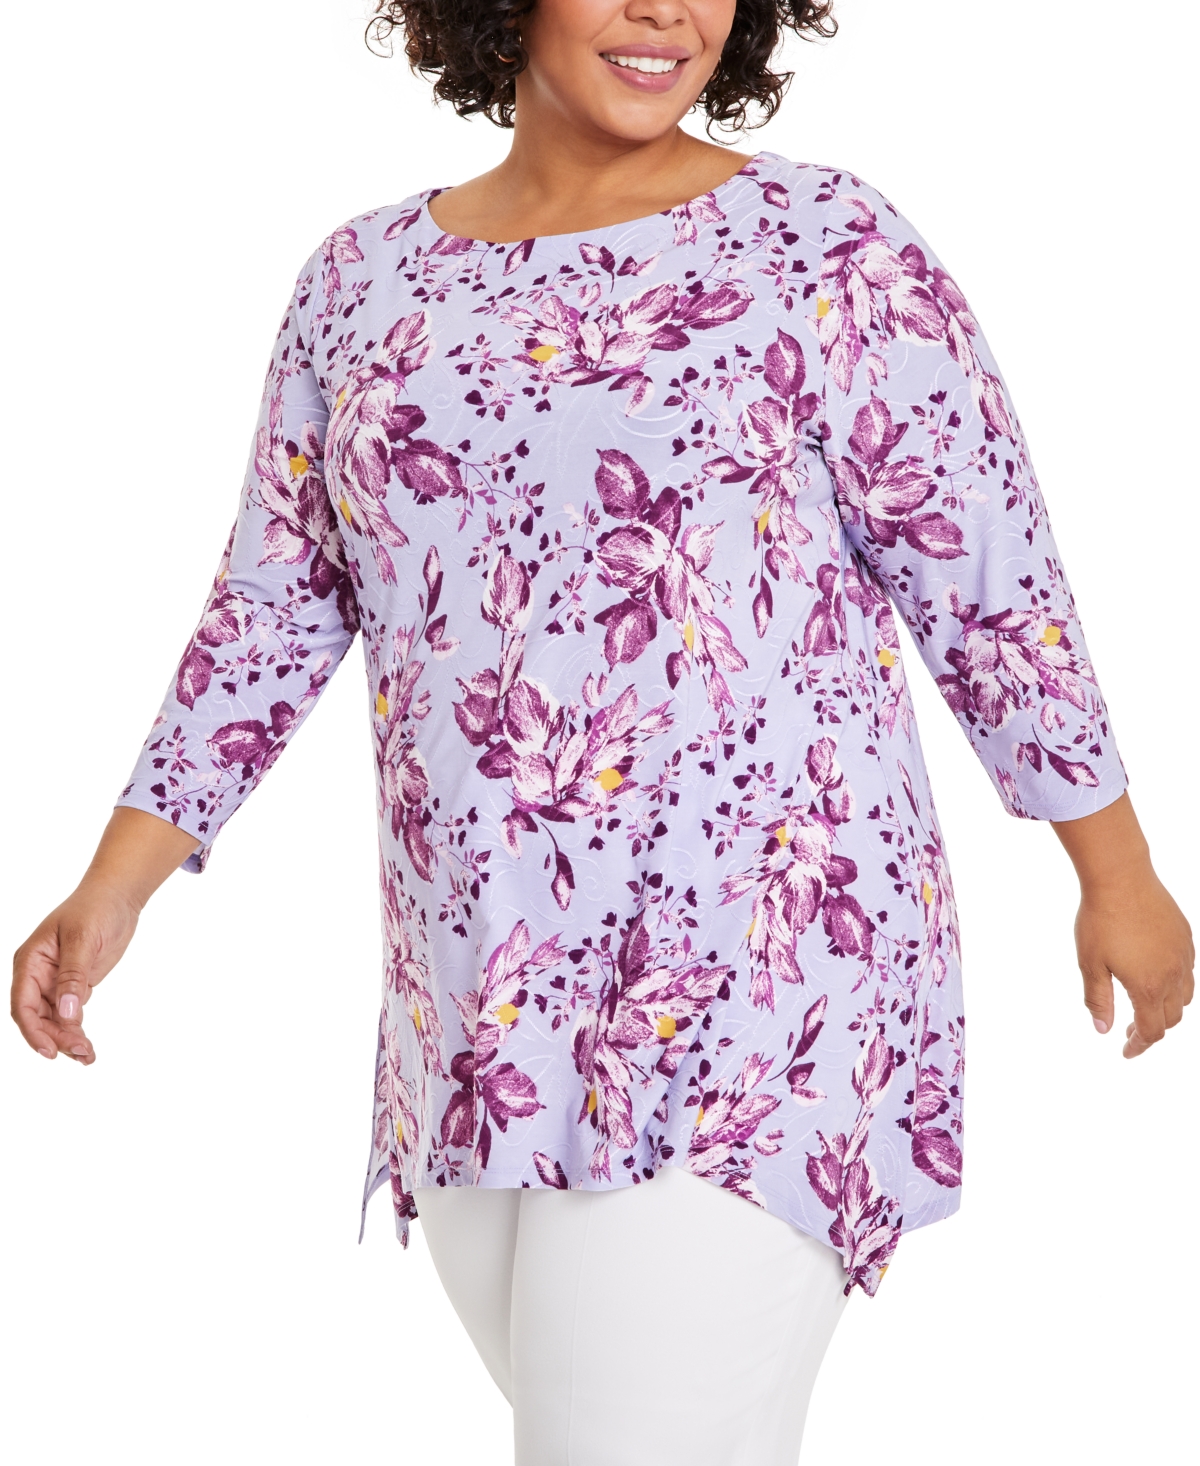 Jm Collection Plus Size Savannah Sprout Jacquard Swing Top, Created For Macy's In Light Lavendar Combo